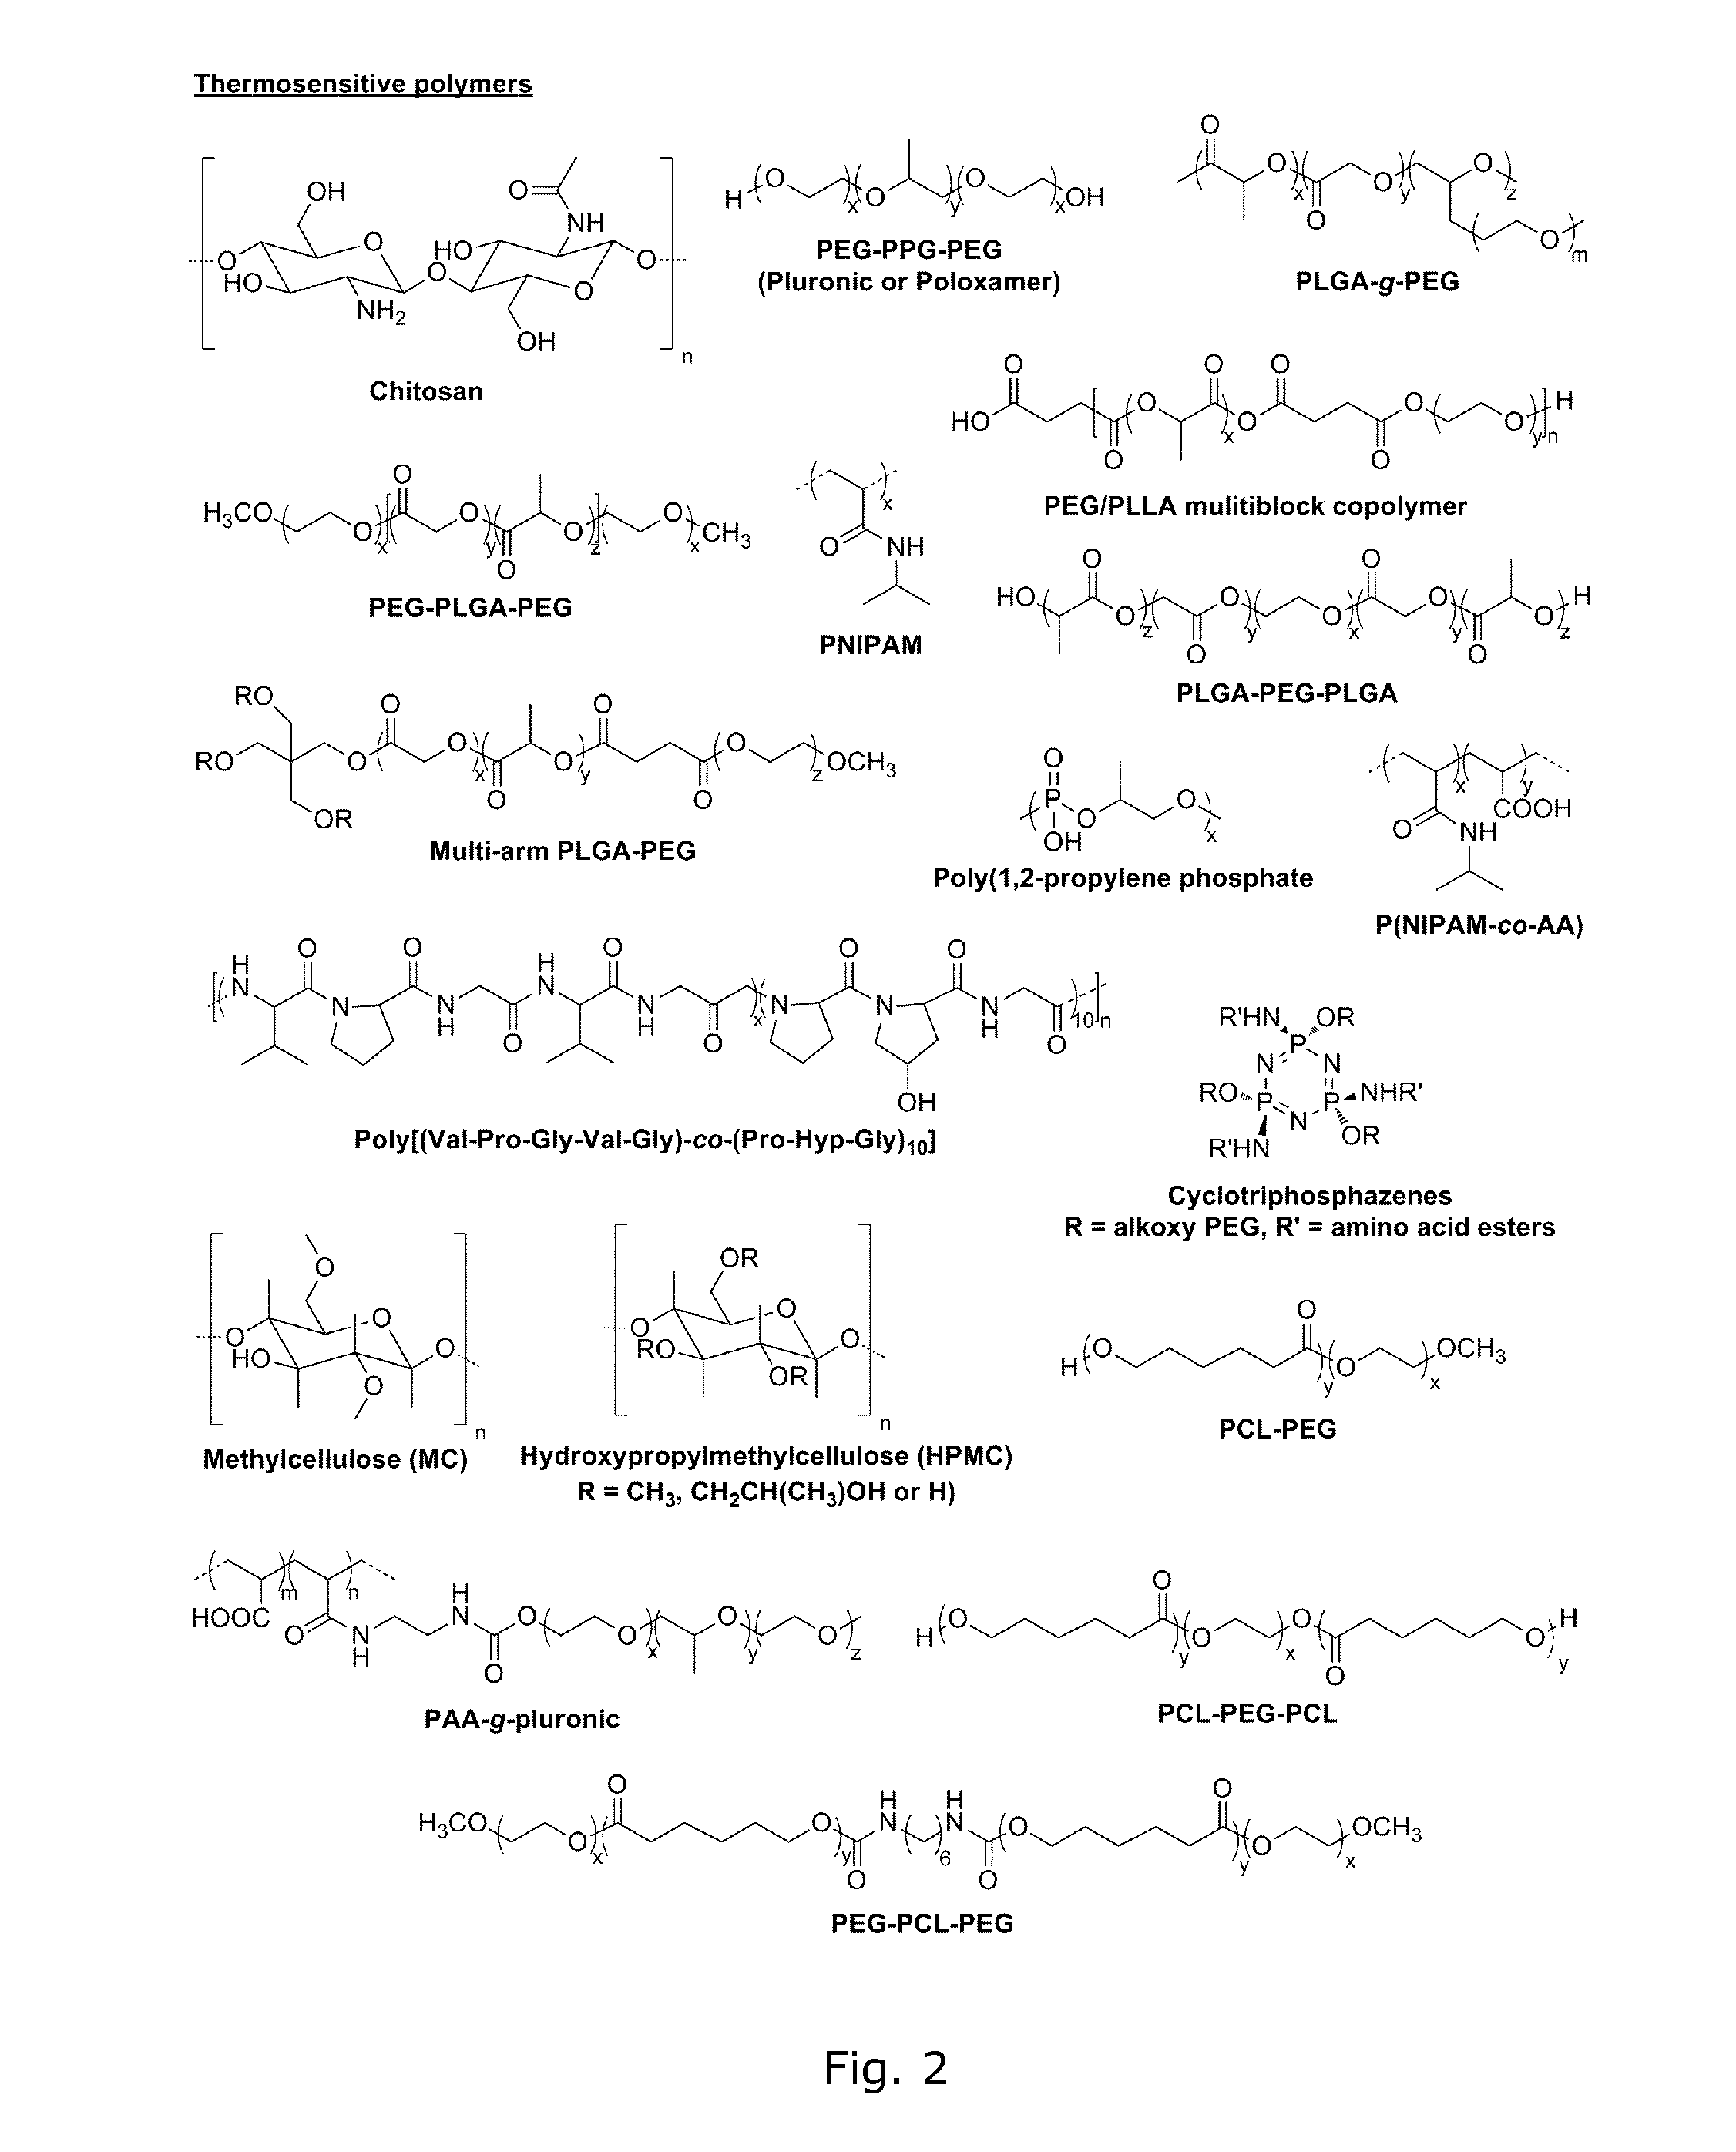 Formulation of solid nano-sized particles in a gel-forming system